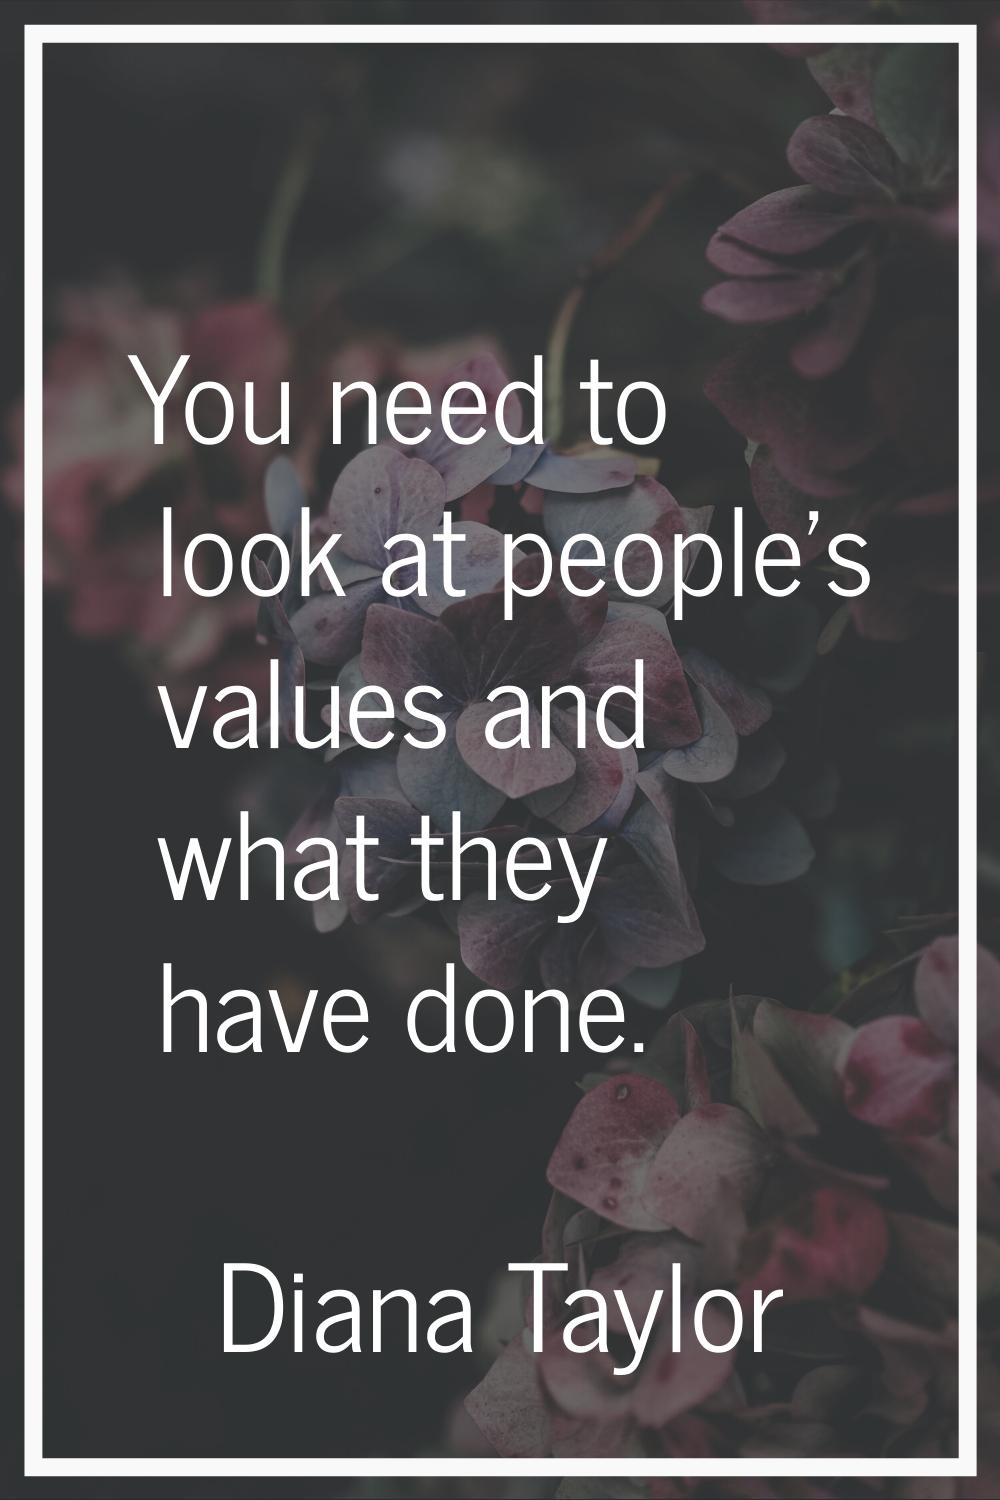 You need to look at people's values and what they have done.